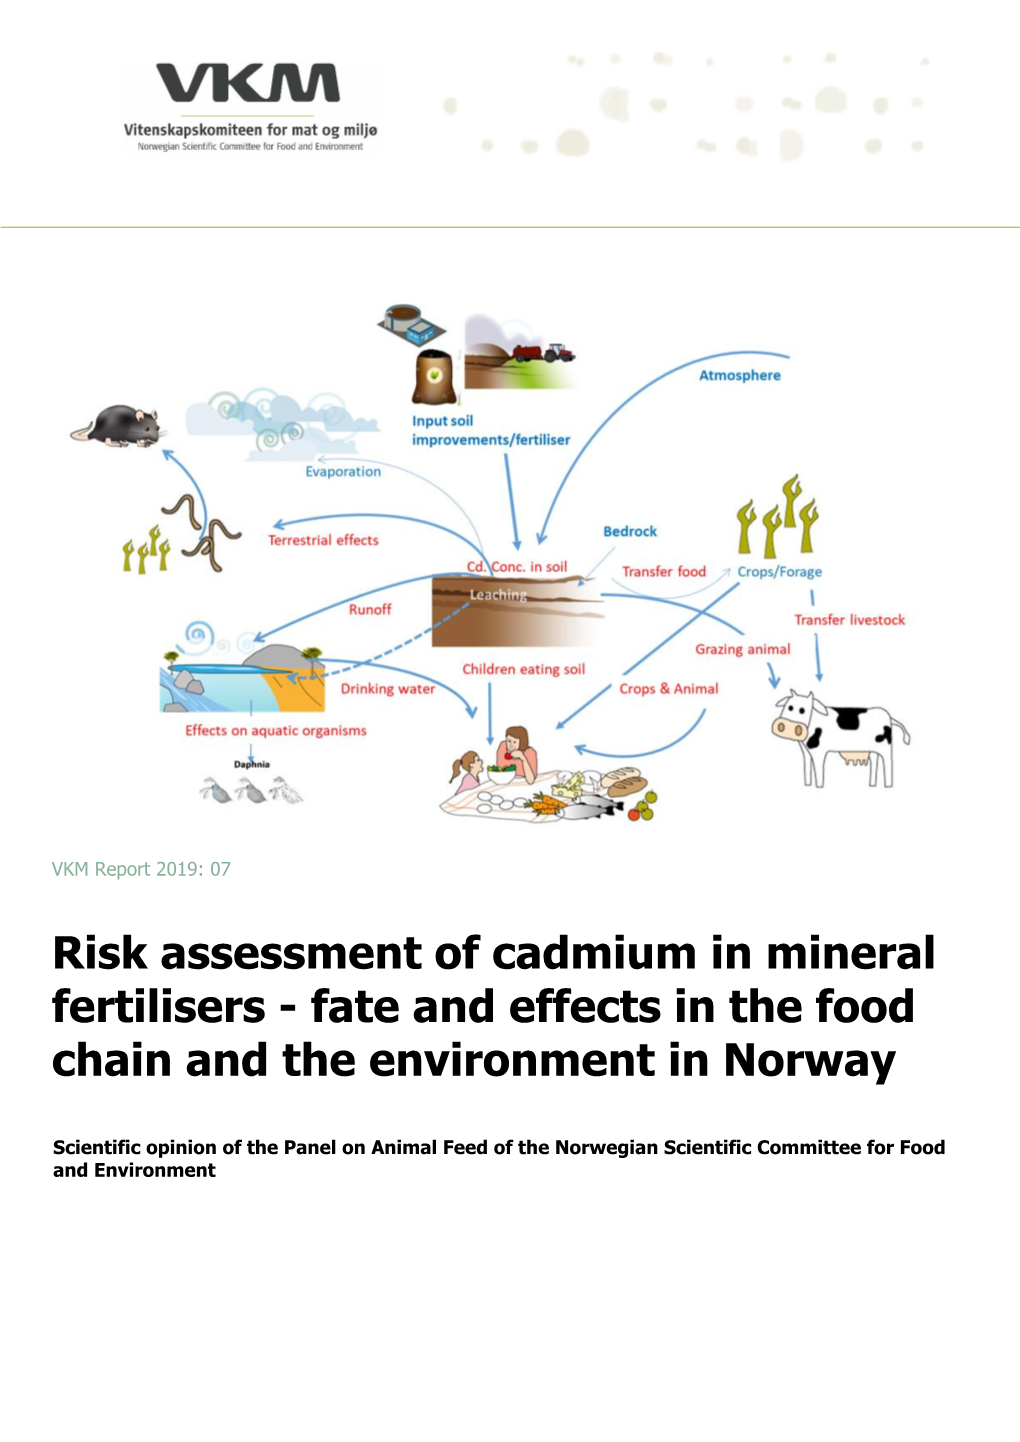 Risk Assessment of Cadmium in Mineral Fertilisers - Fate and Effects in the Food Chain and the Environment in Norway